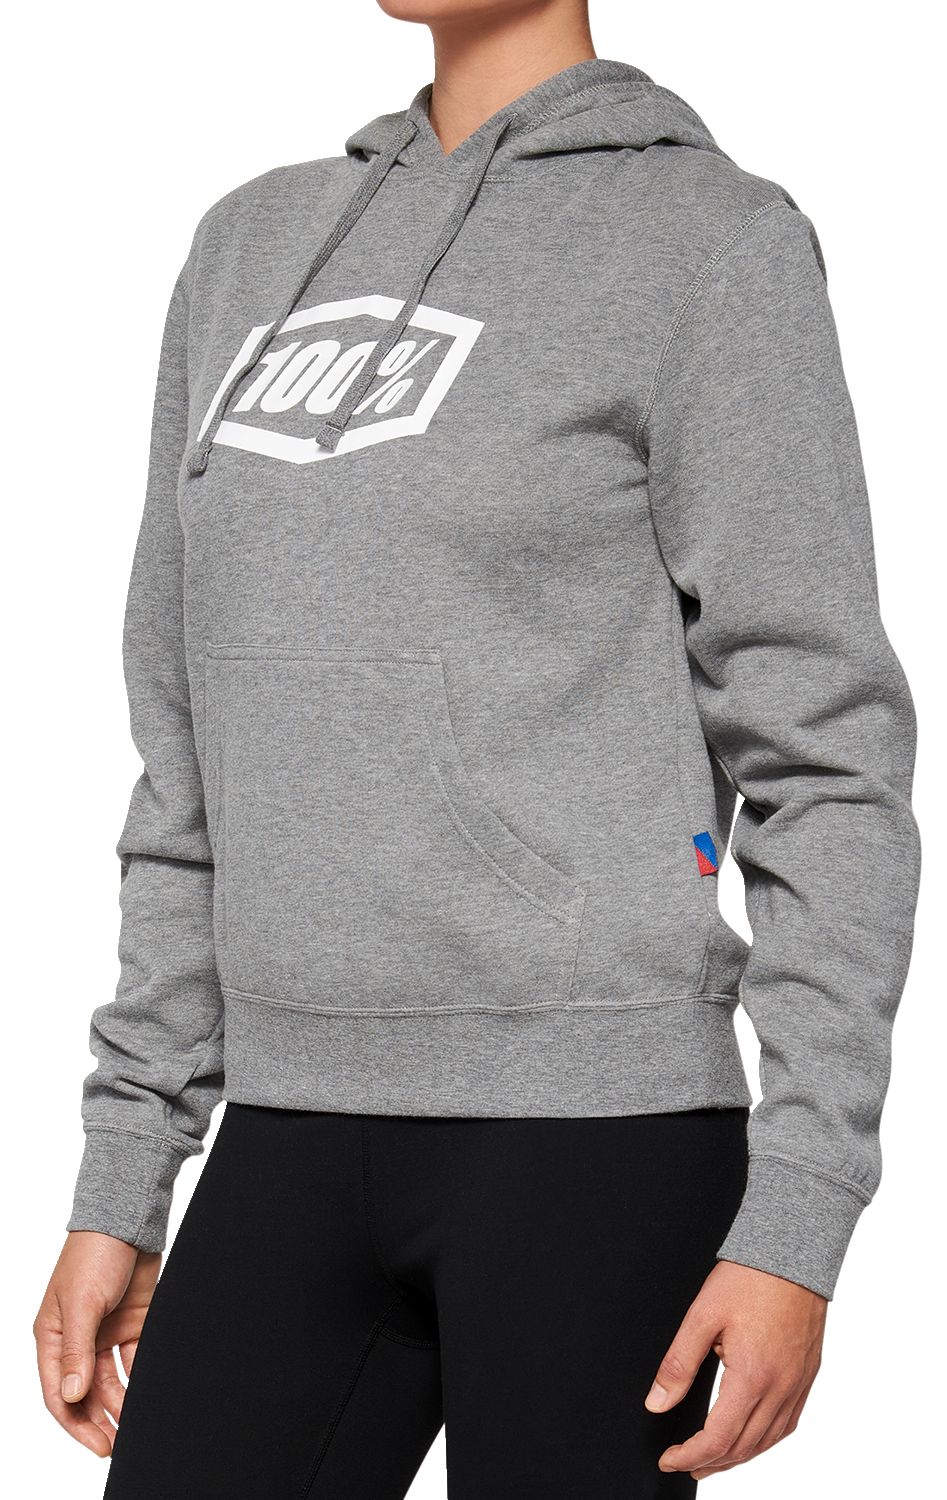 100% Women's Icon Hoodie - Heather Gray - Small 20031-00004